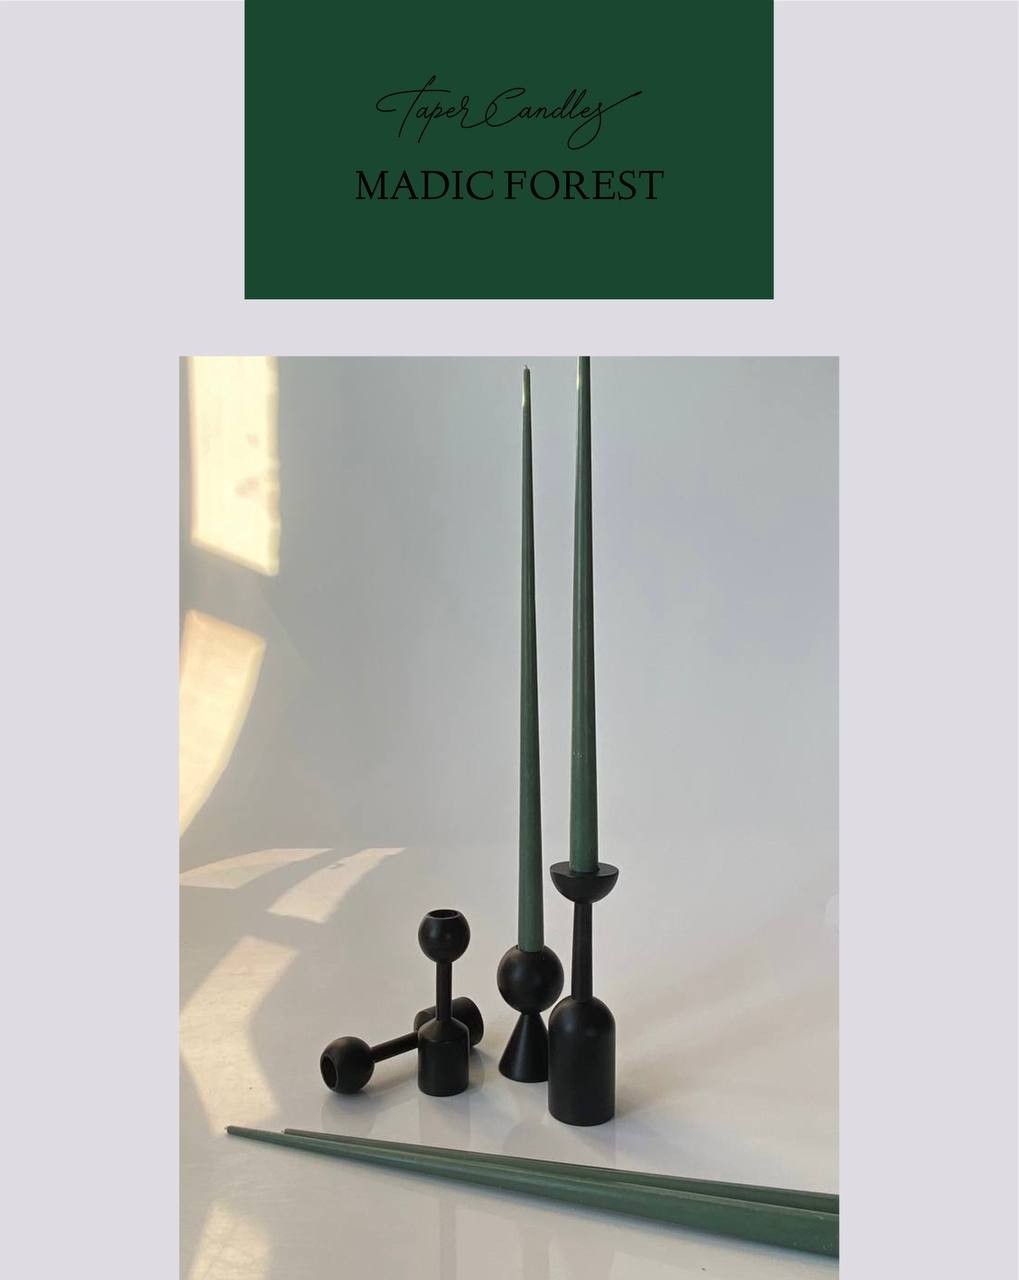 Set of 4 tall candles "Magic forest"